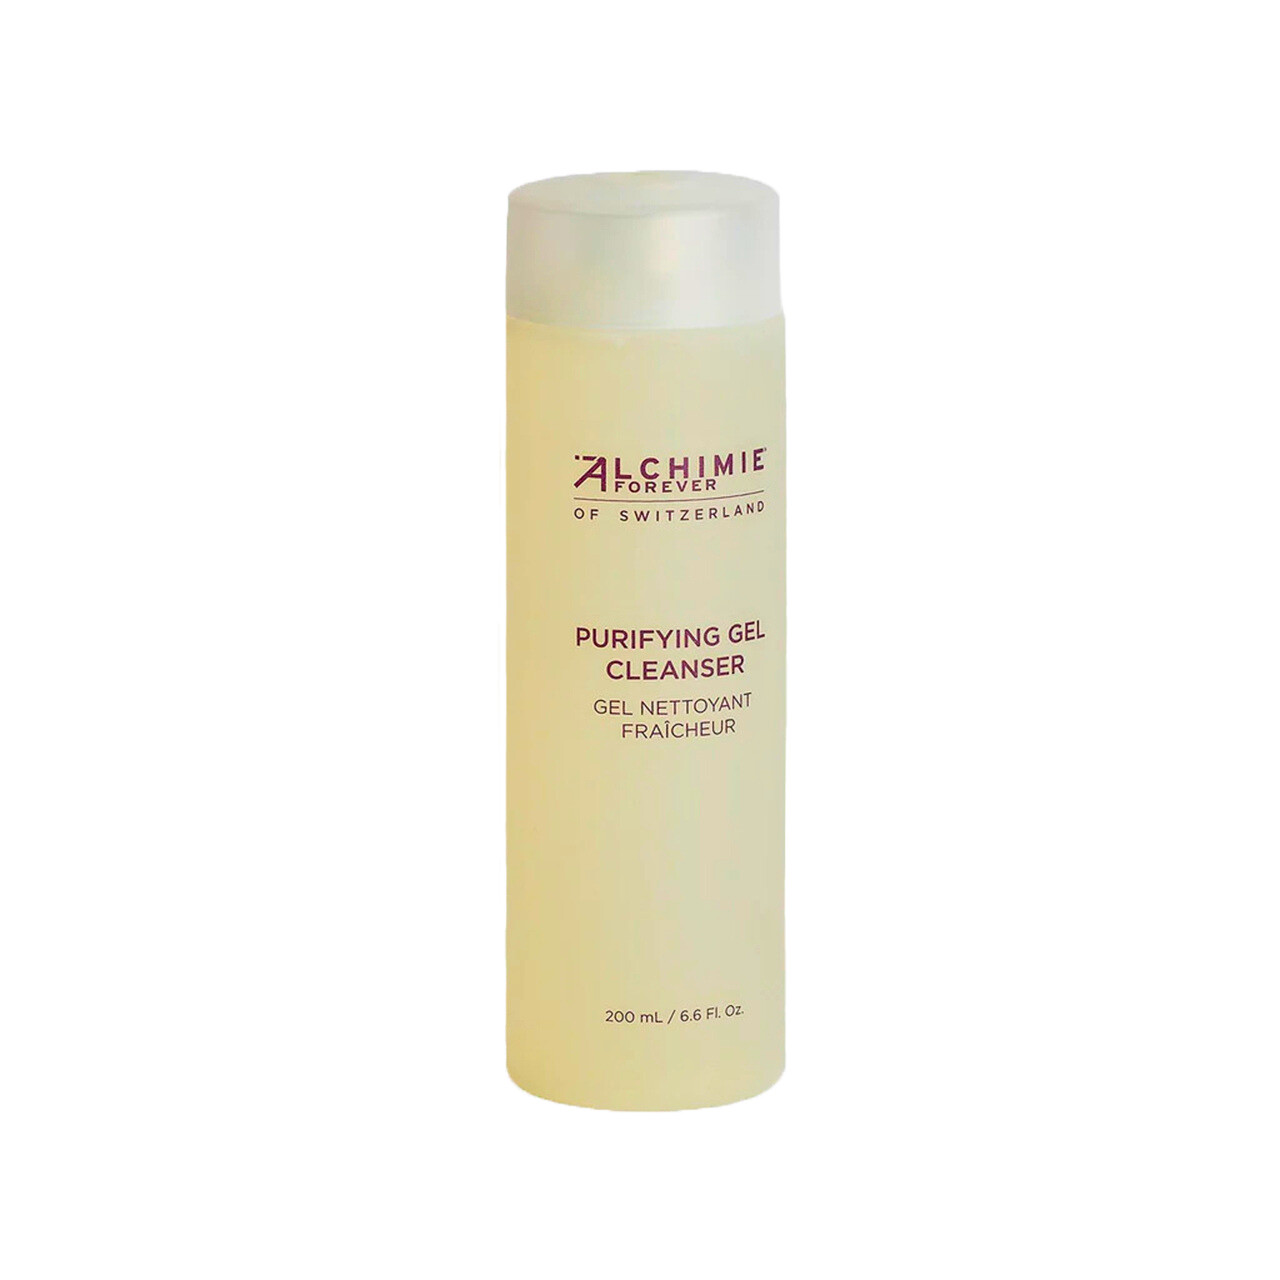 Alchimie Forever of Switzerland Purifying Gel Cleanser — 6.6oz